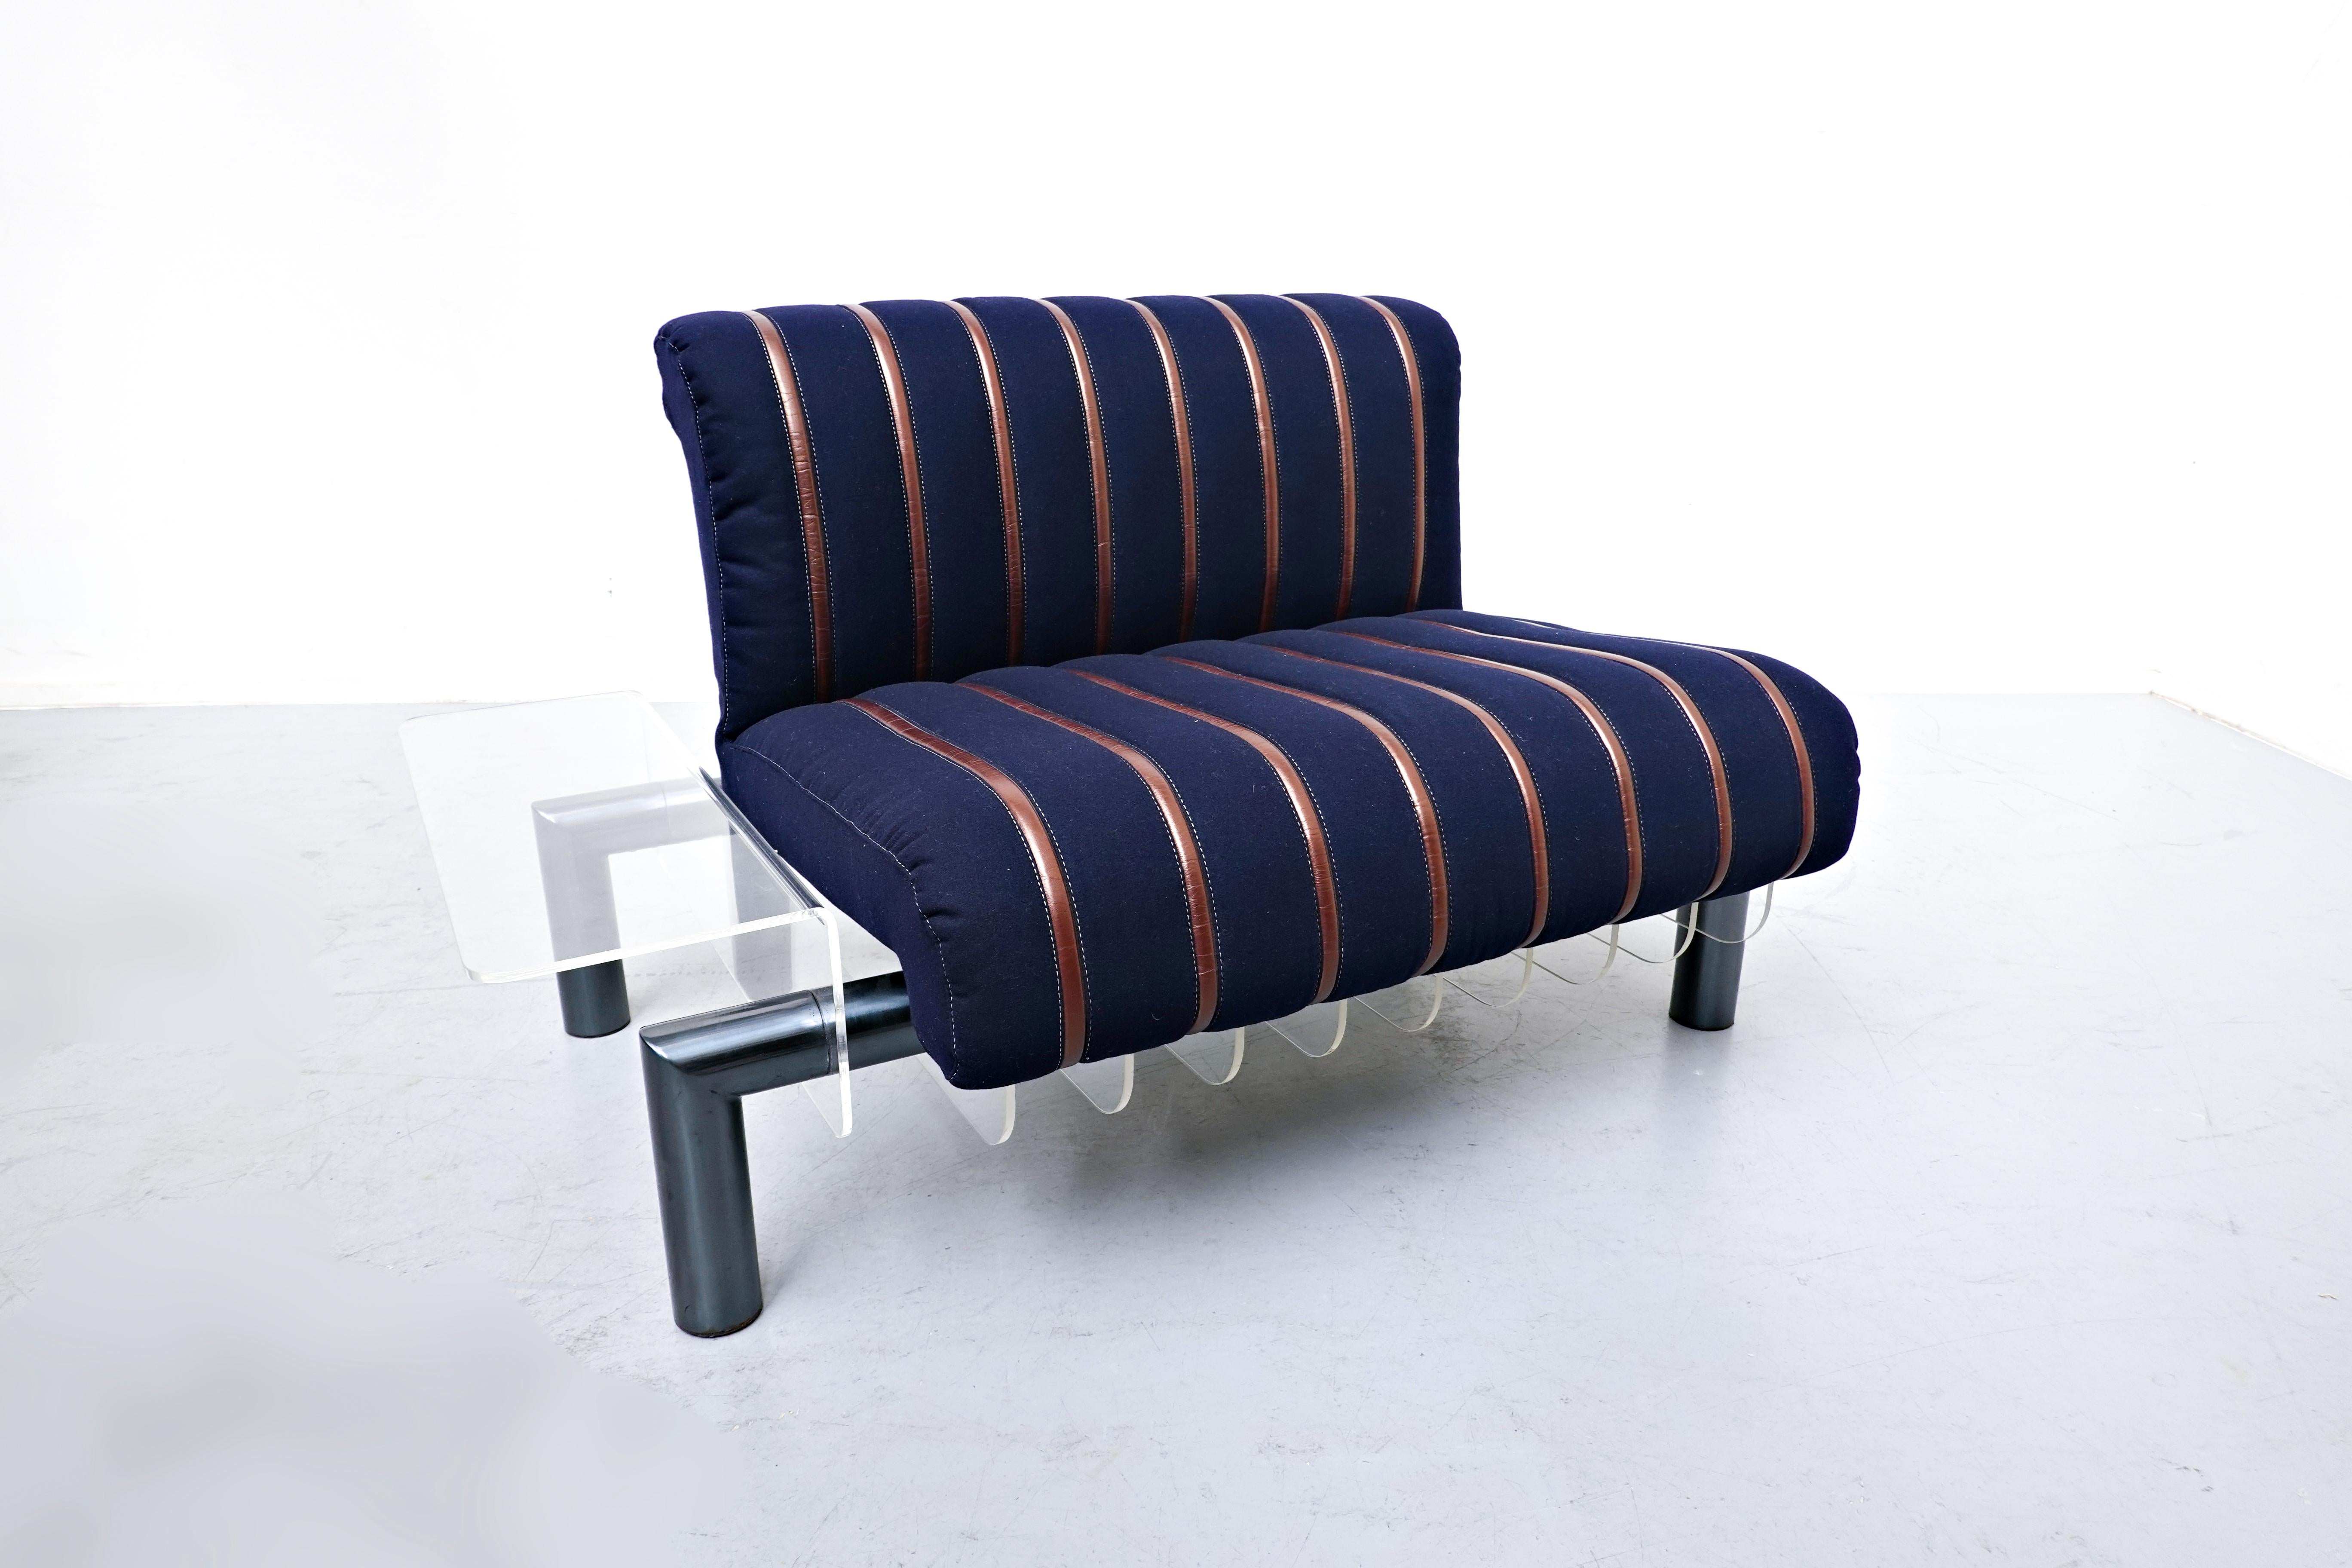 Late 20th Century Mid-Century Modern Blue fabric and Leather Sofa by Nico Trussardi, Italy, 1983